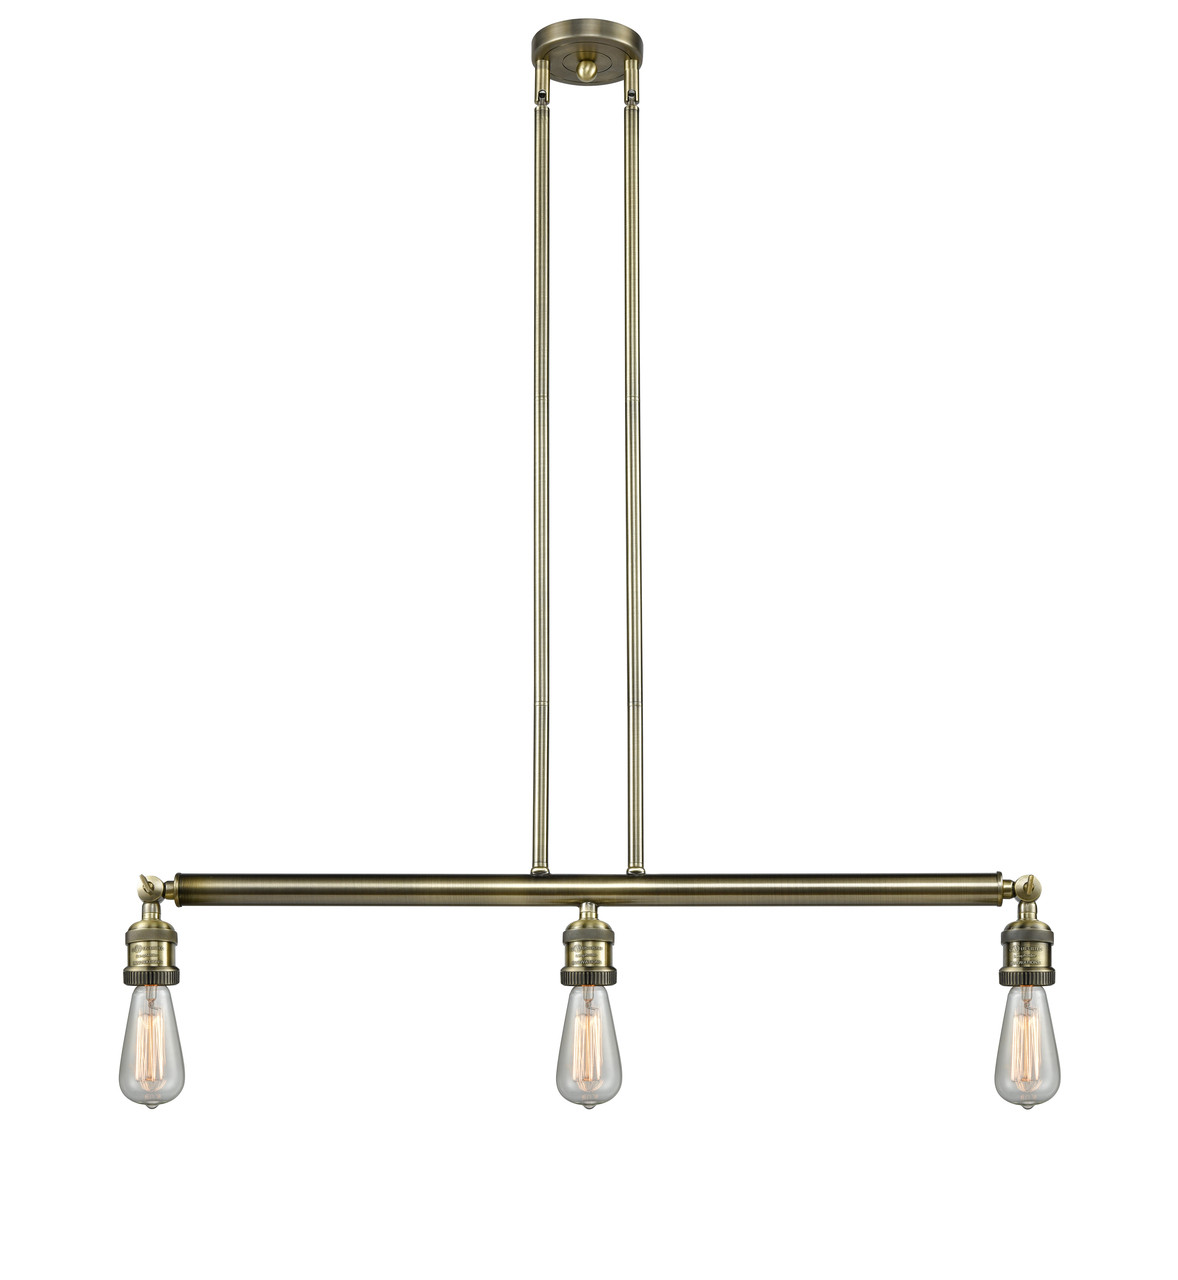 INNOVATIONS 213-AB Bare Bulb 3 Light Island Light part of the Franklin Restoration Collection Antique Brass